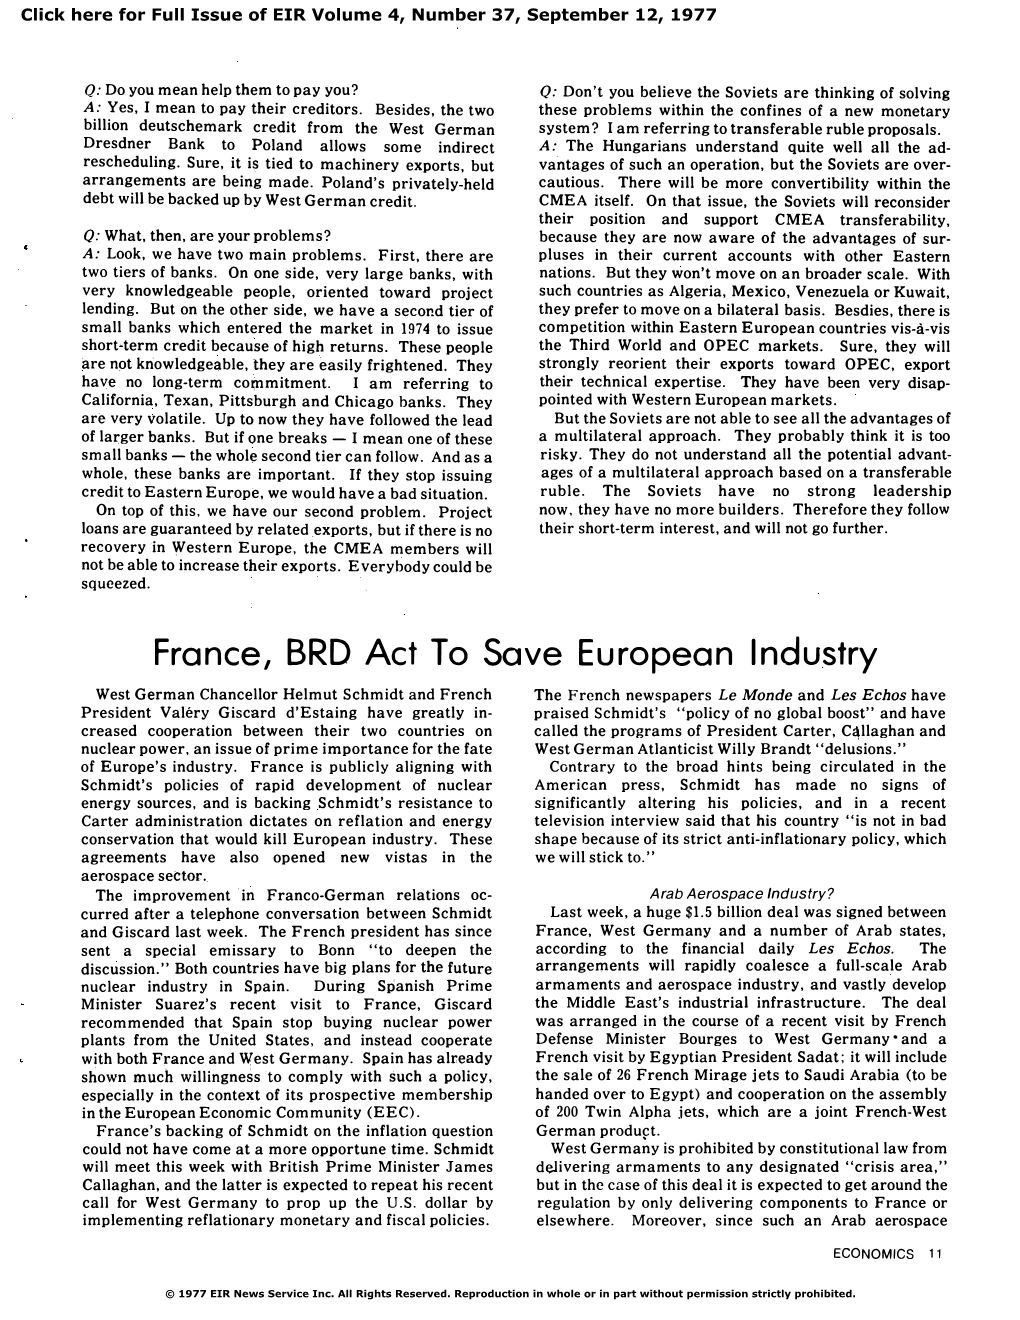 France, B.R.D. Act to Save European Industry